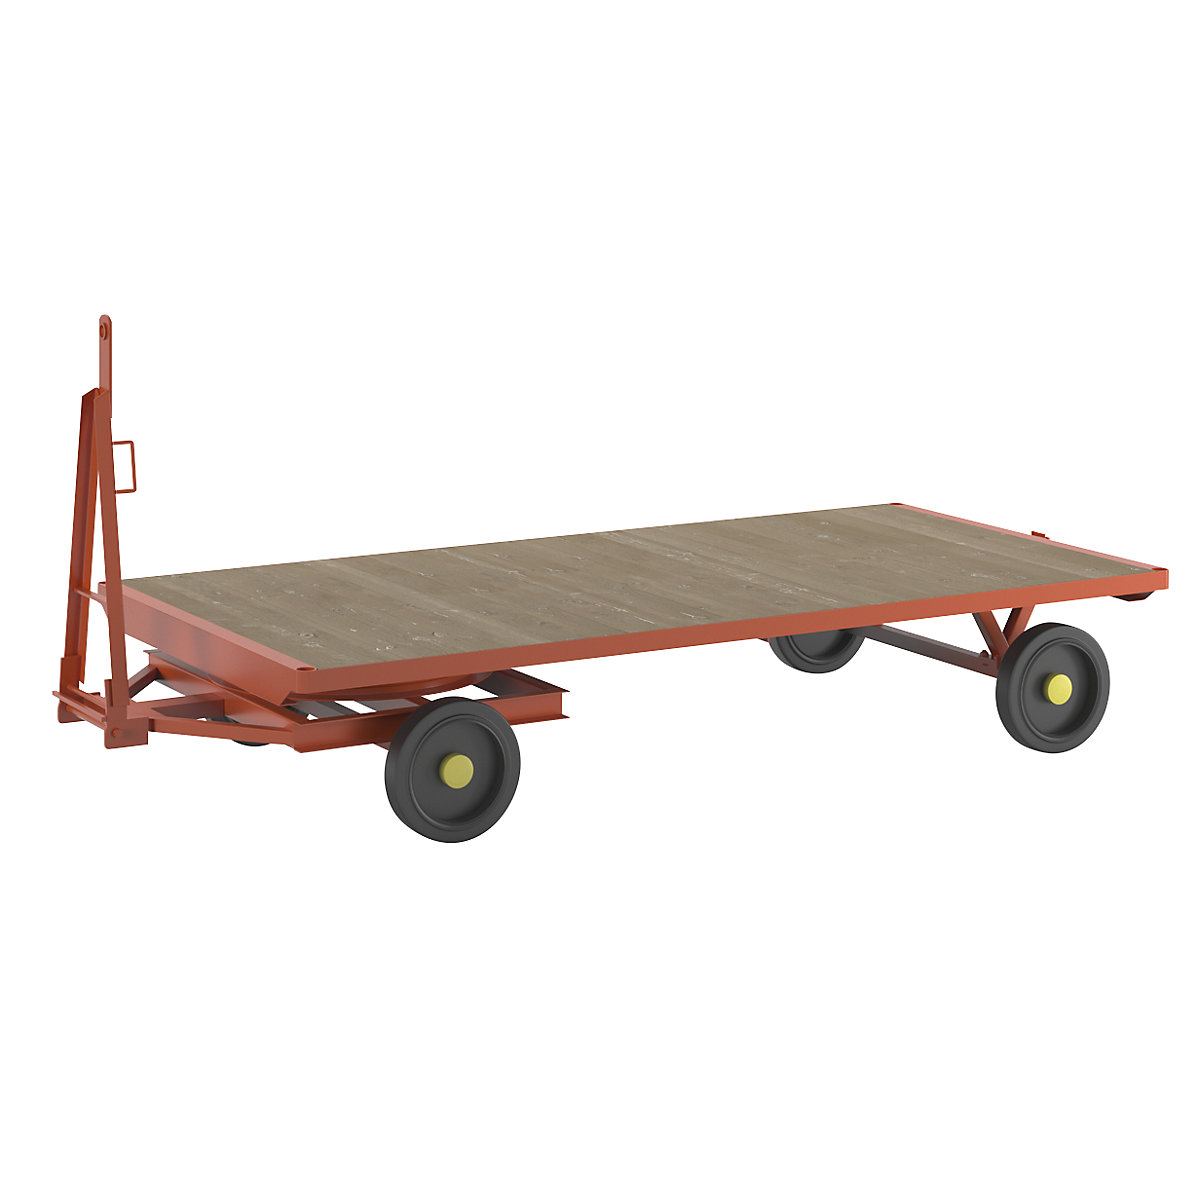 Trailer, 2-wheel turntable steering, max. load 2 t, platform 3.0 x 1.5 m, solid rubber tyres-16